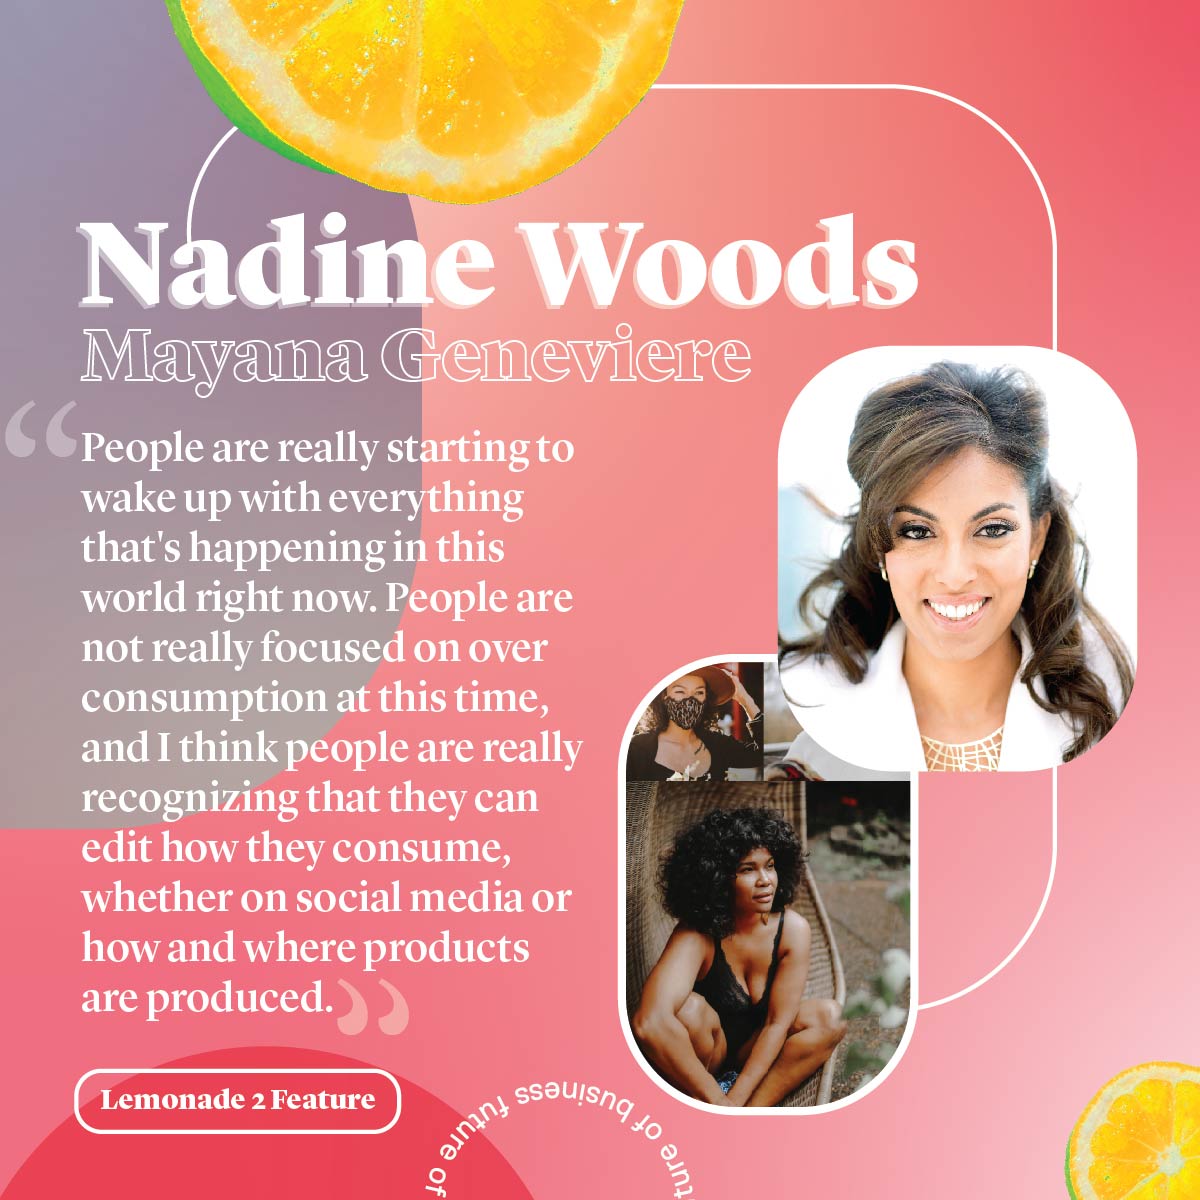 Nadine Woods, founder of Mayana Geneviére, headshot and quote